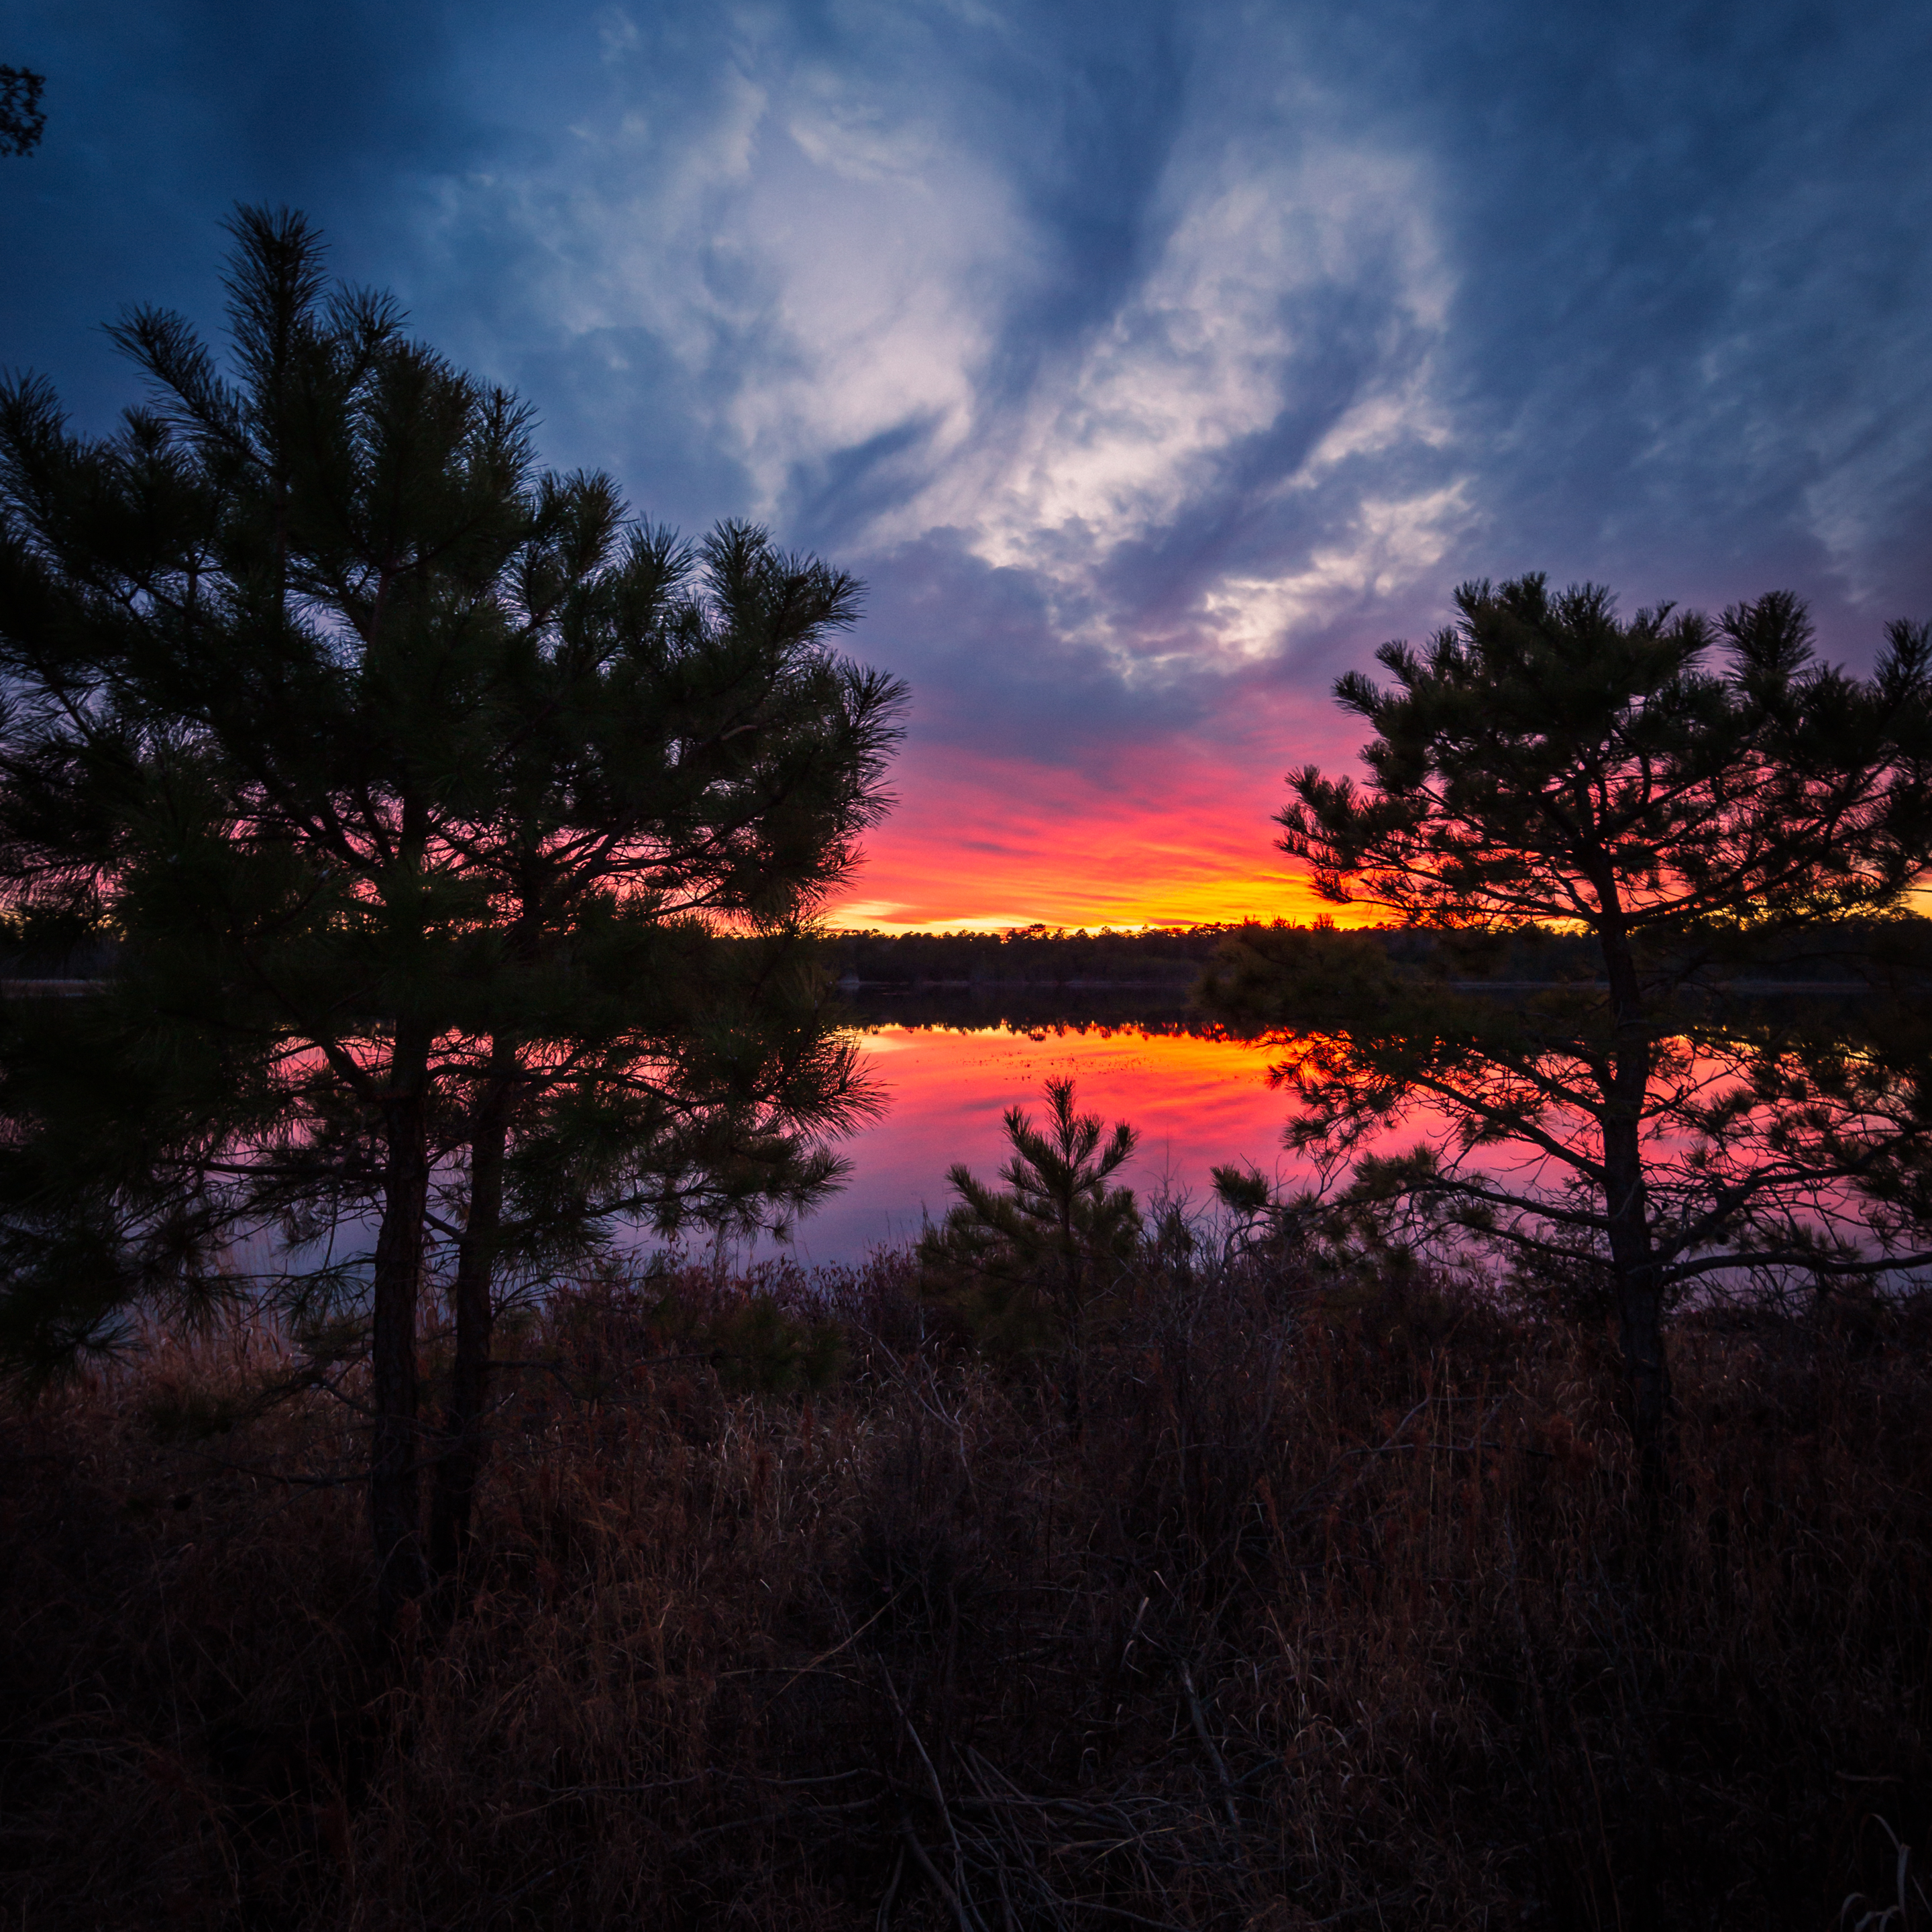 14mm square format photo depicts a fiery sunset over the lake framed between the contrasted silhouettes of two small pine trees.